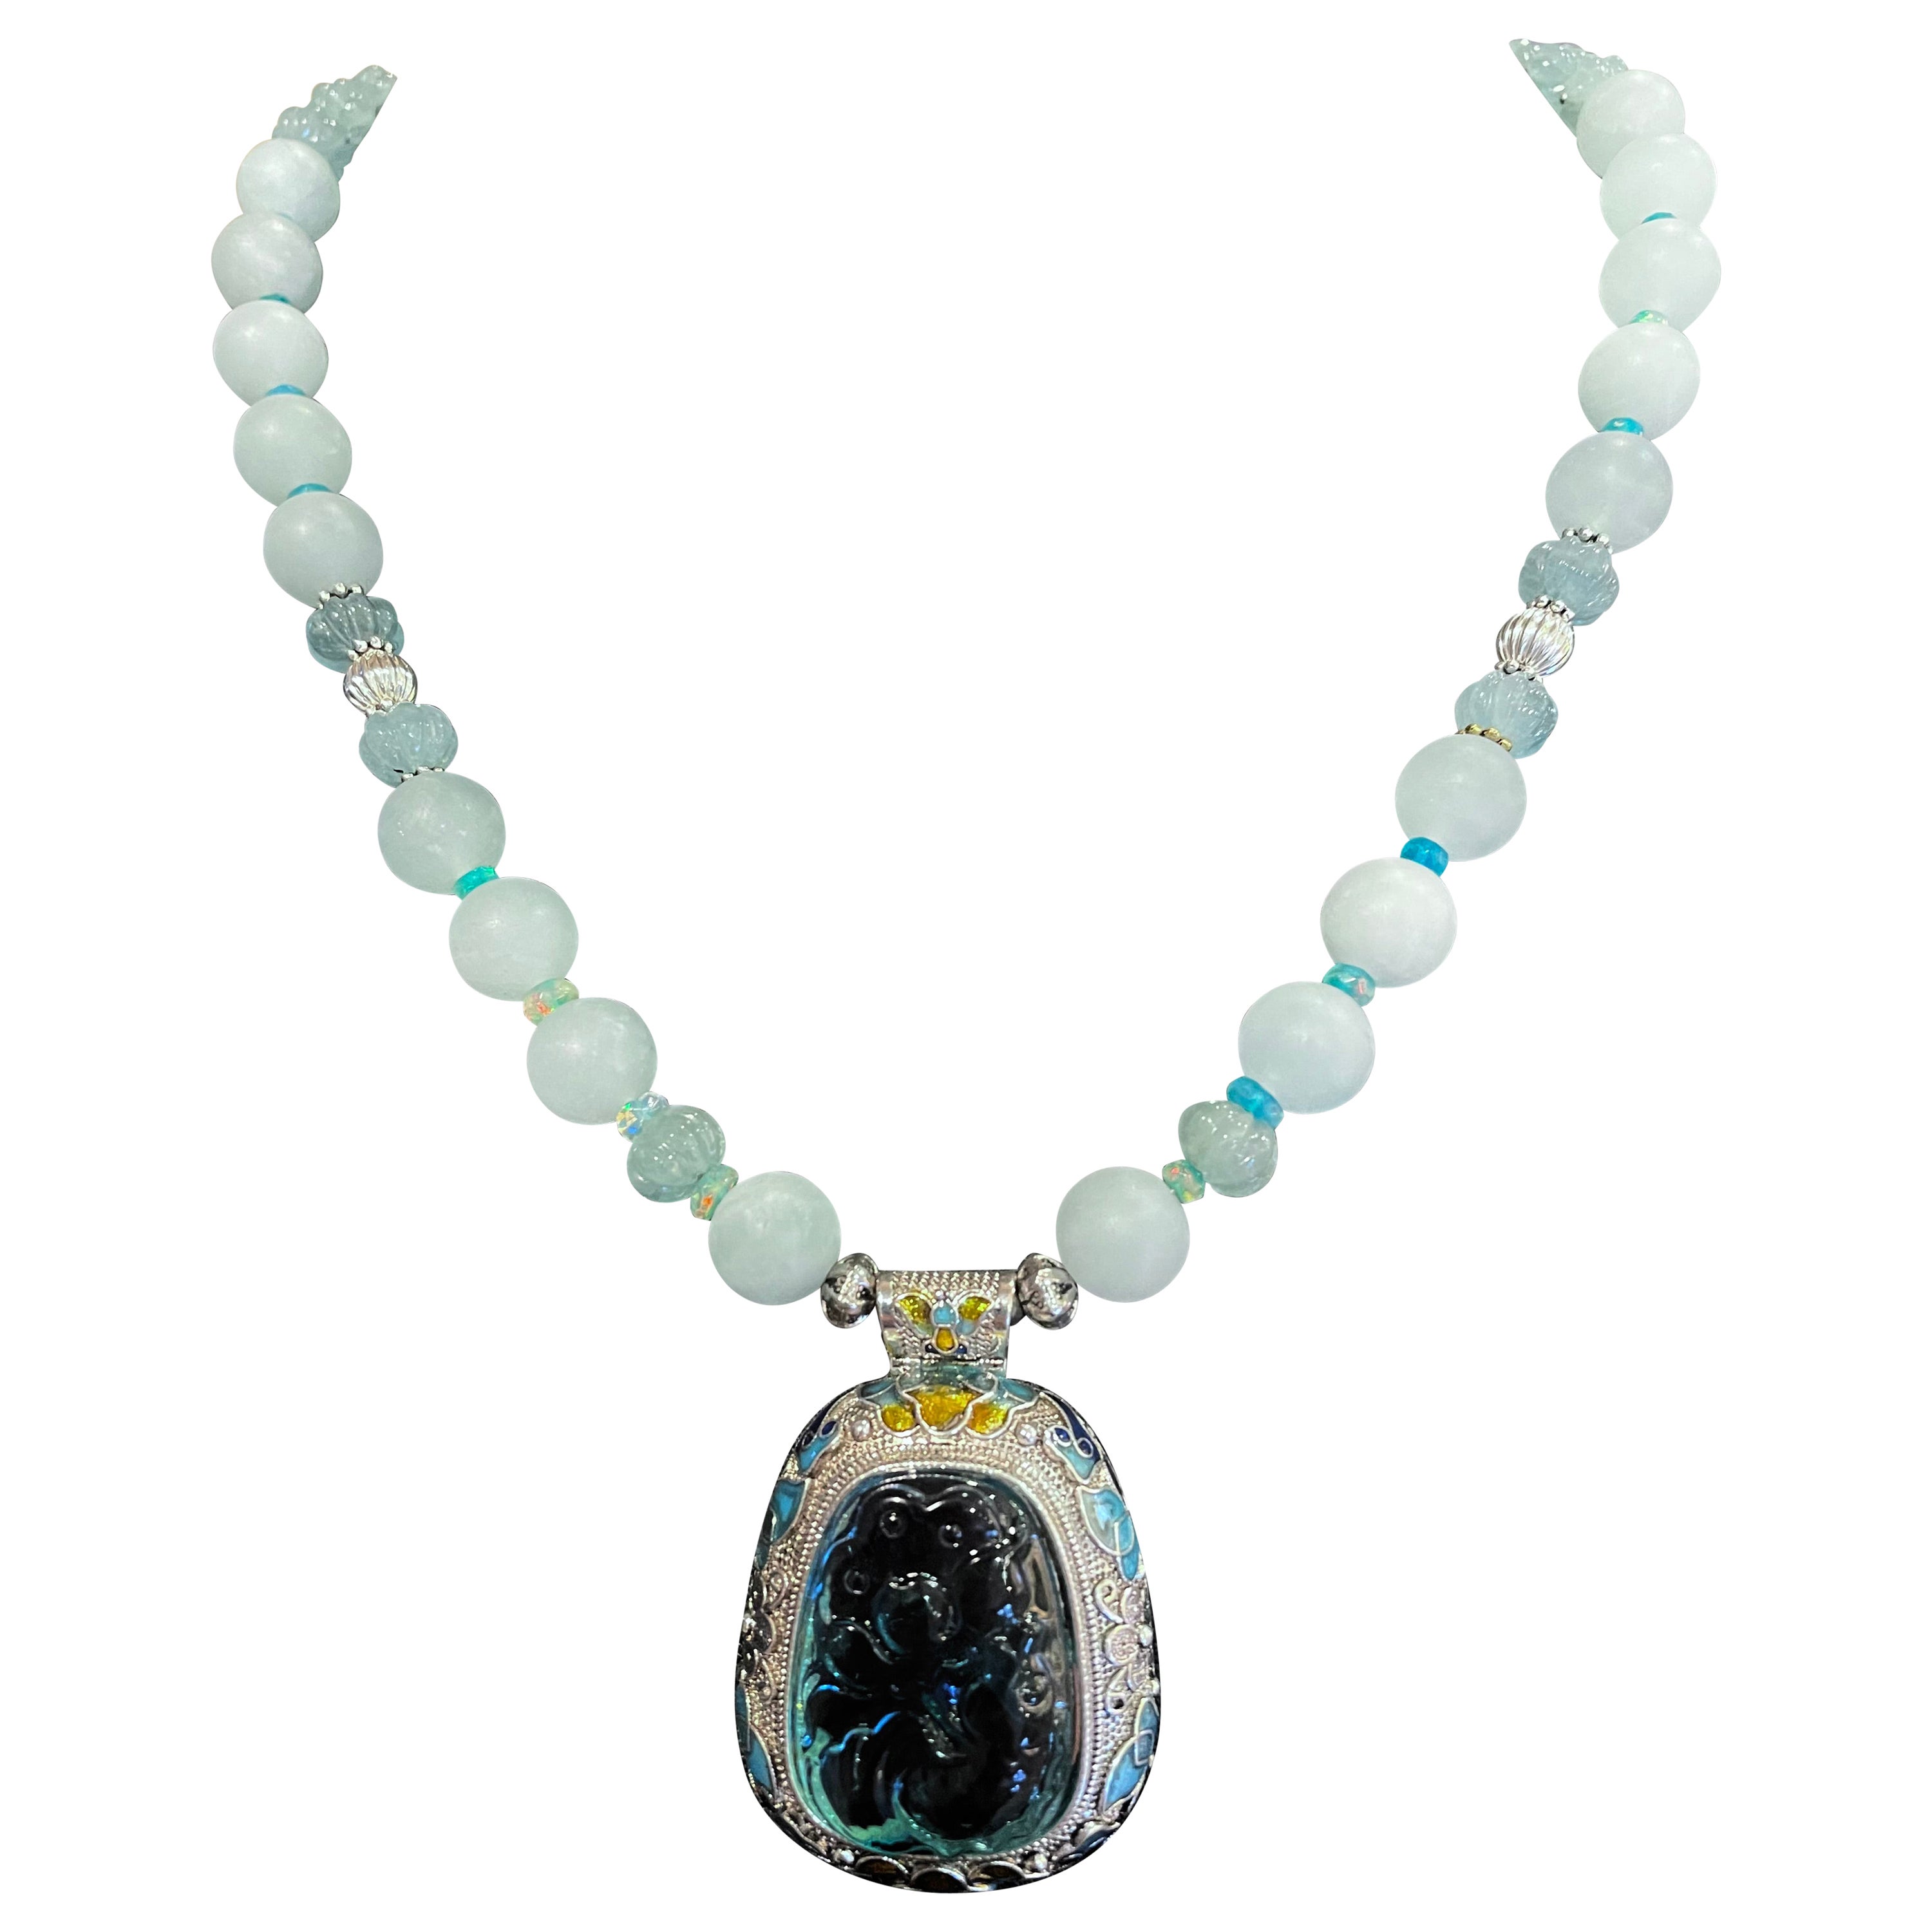 LB offers Sterling Silver Glass Aquamarine Opal Enamel Chinese pendant necklace